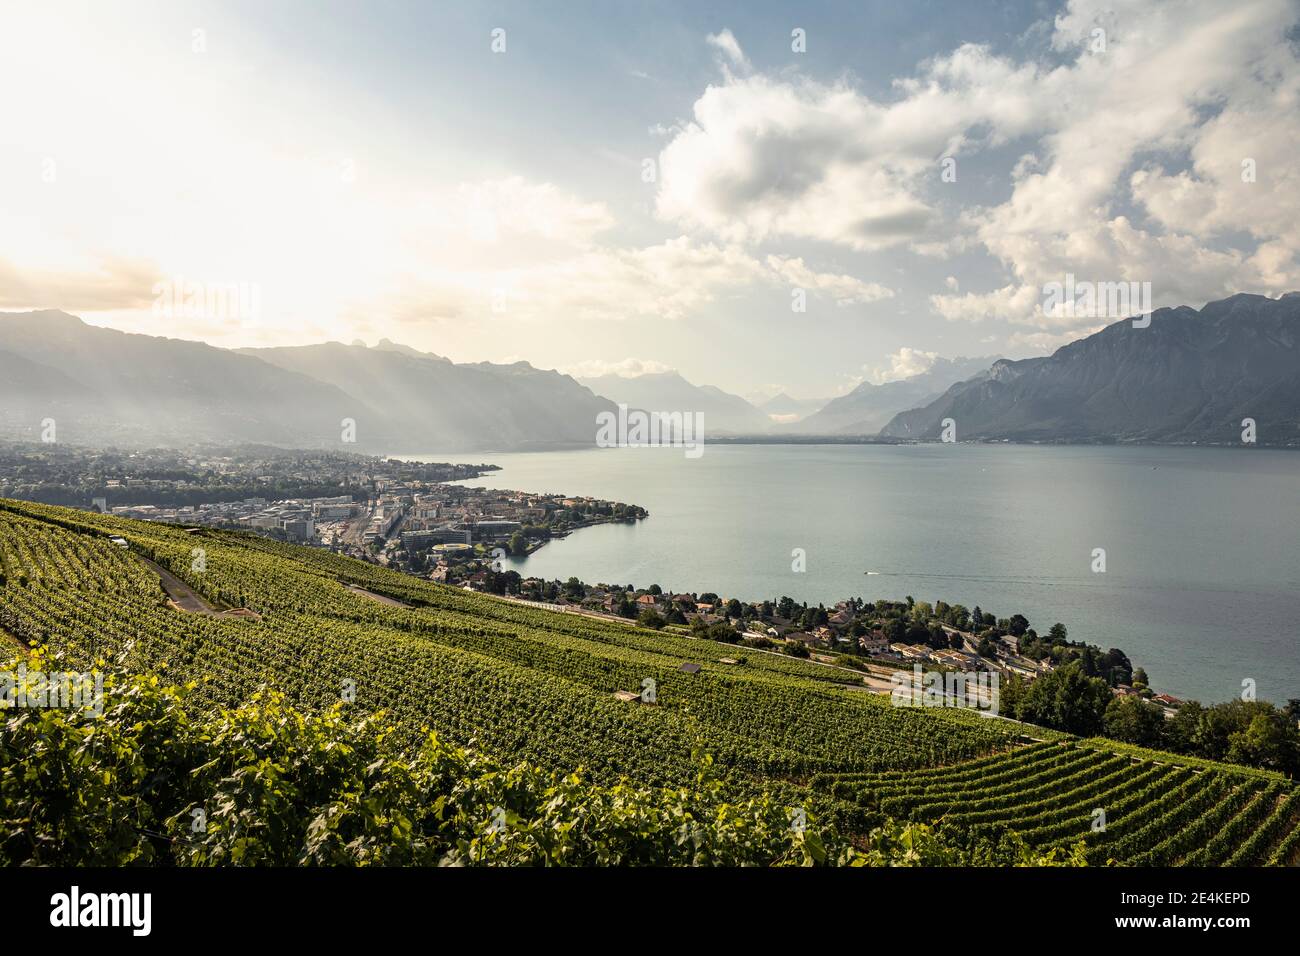 Vineyards and town on lakeshore with mountains in distance Stock Photo